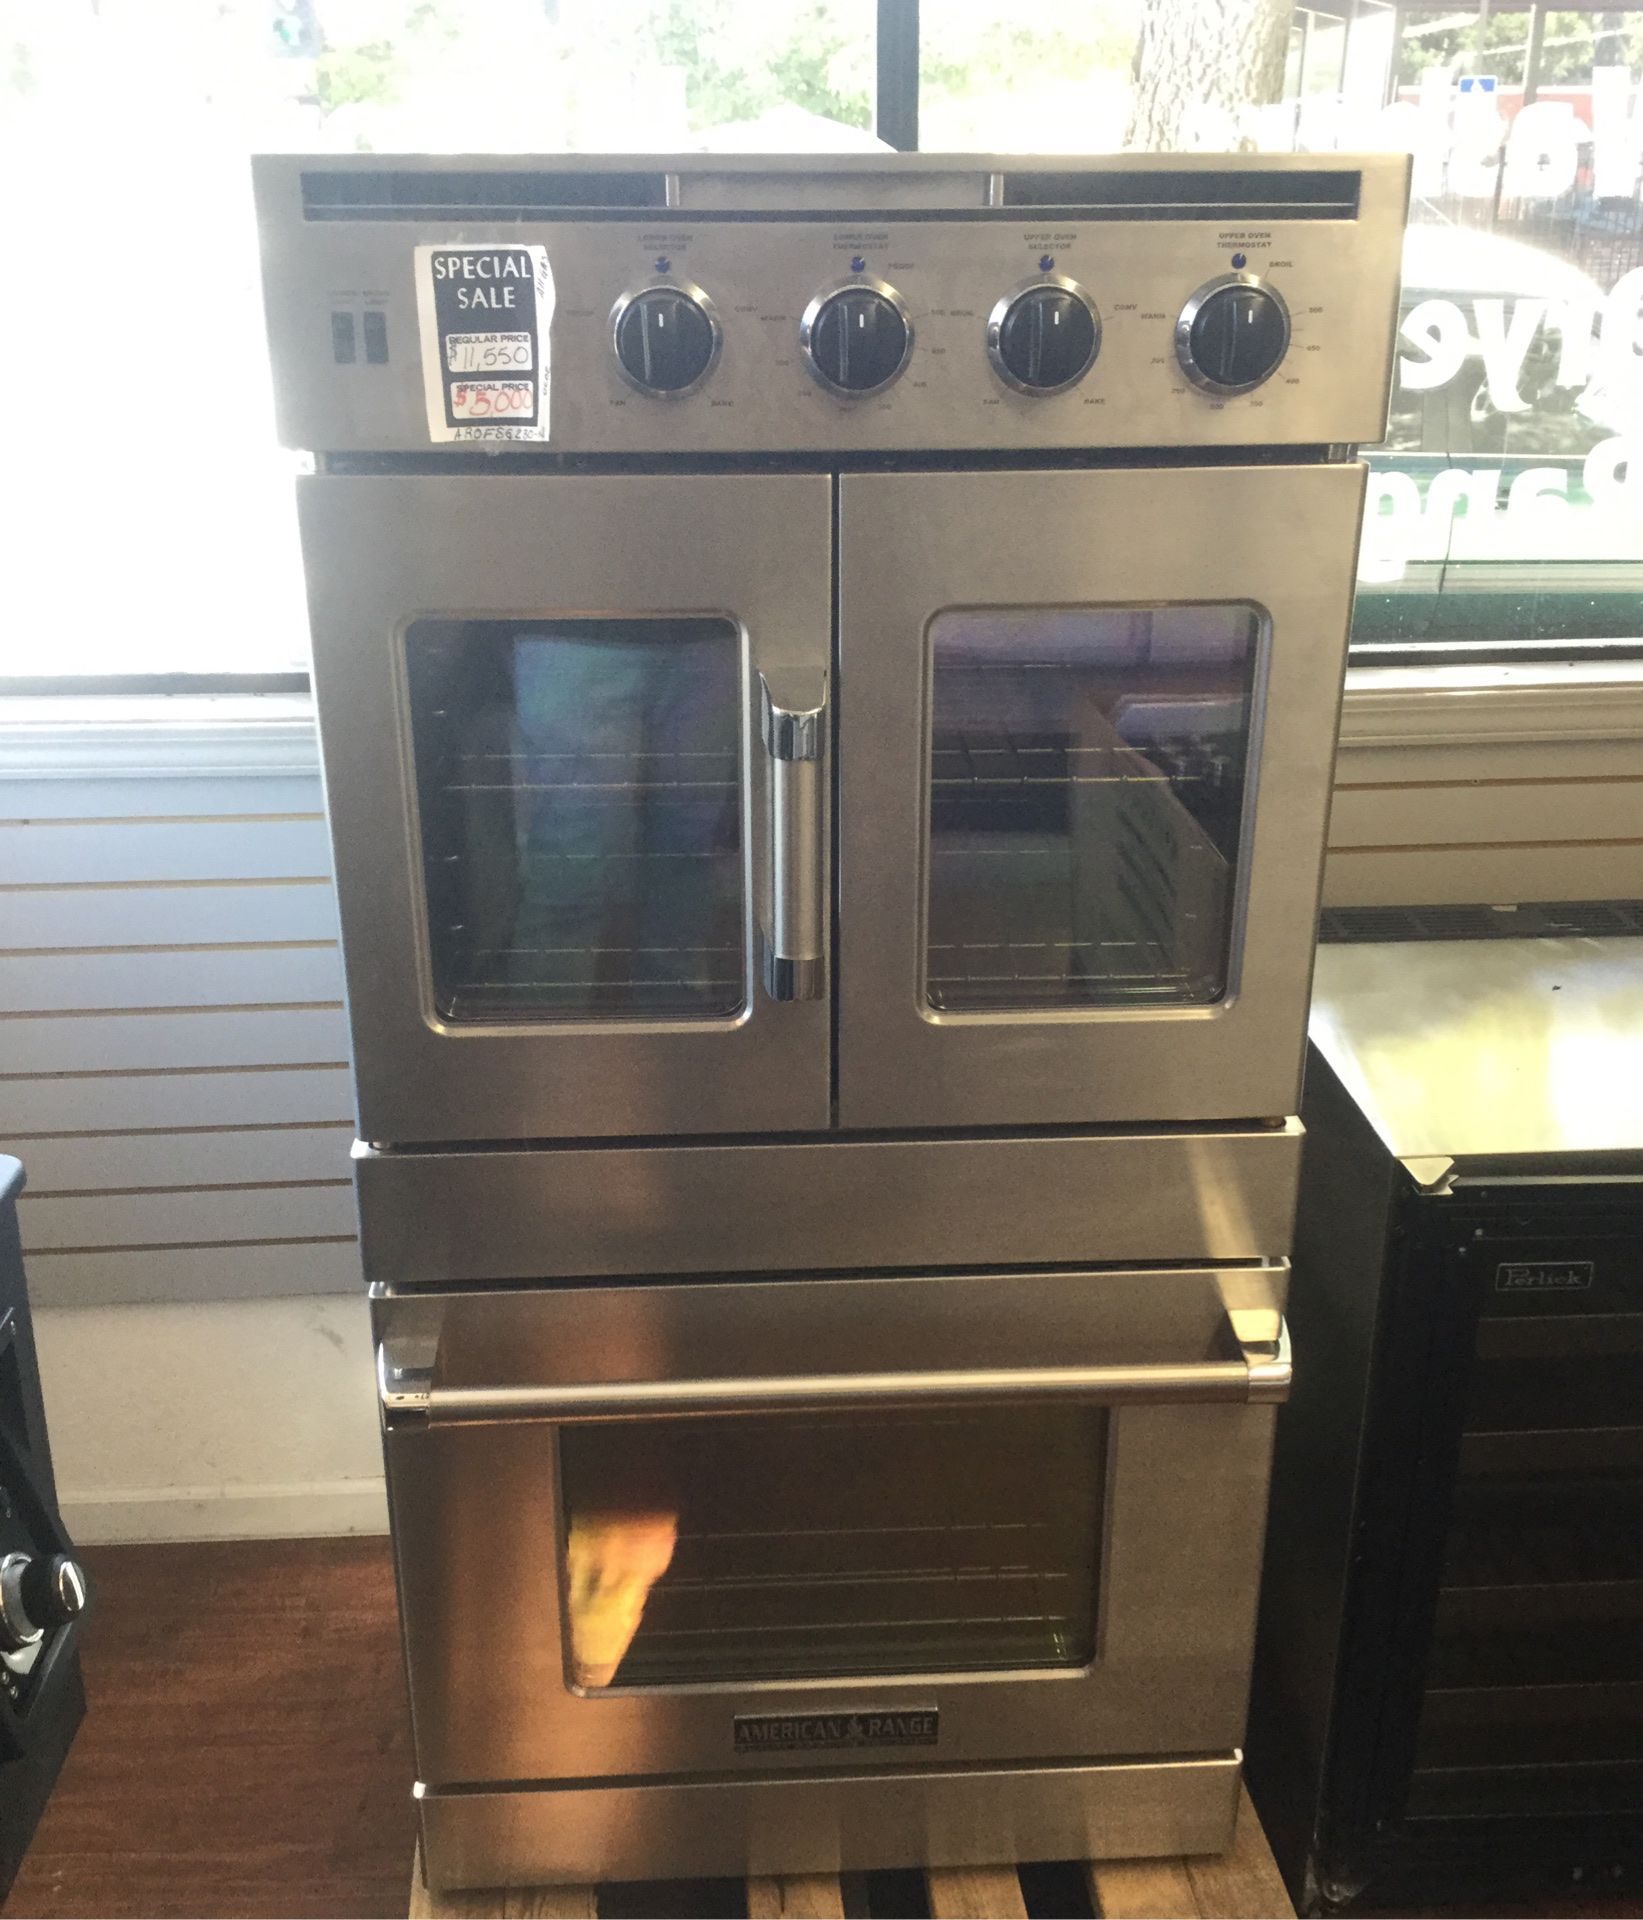 AMERICAN RANGE commercial 30” all gas double wall oven